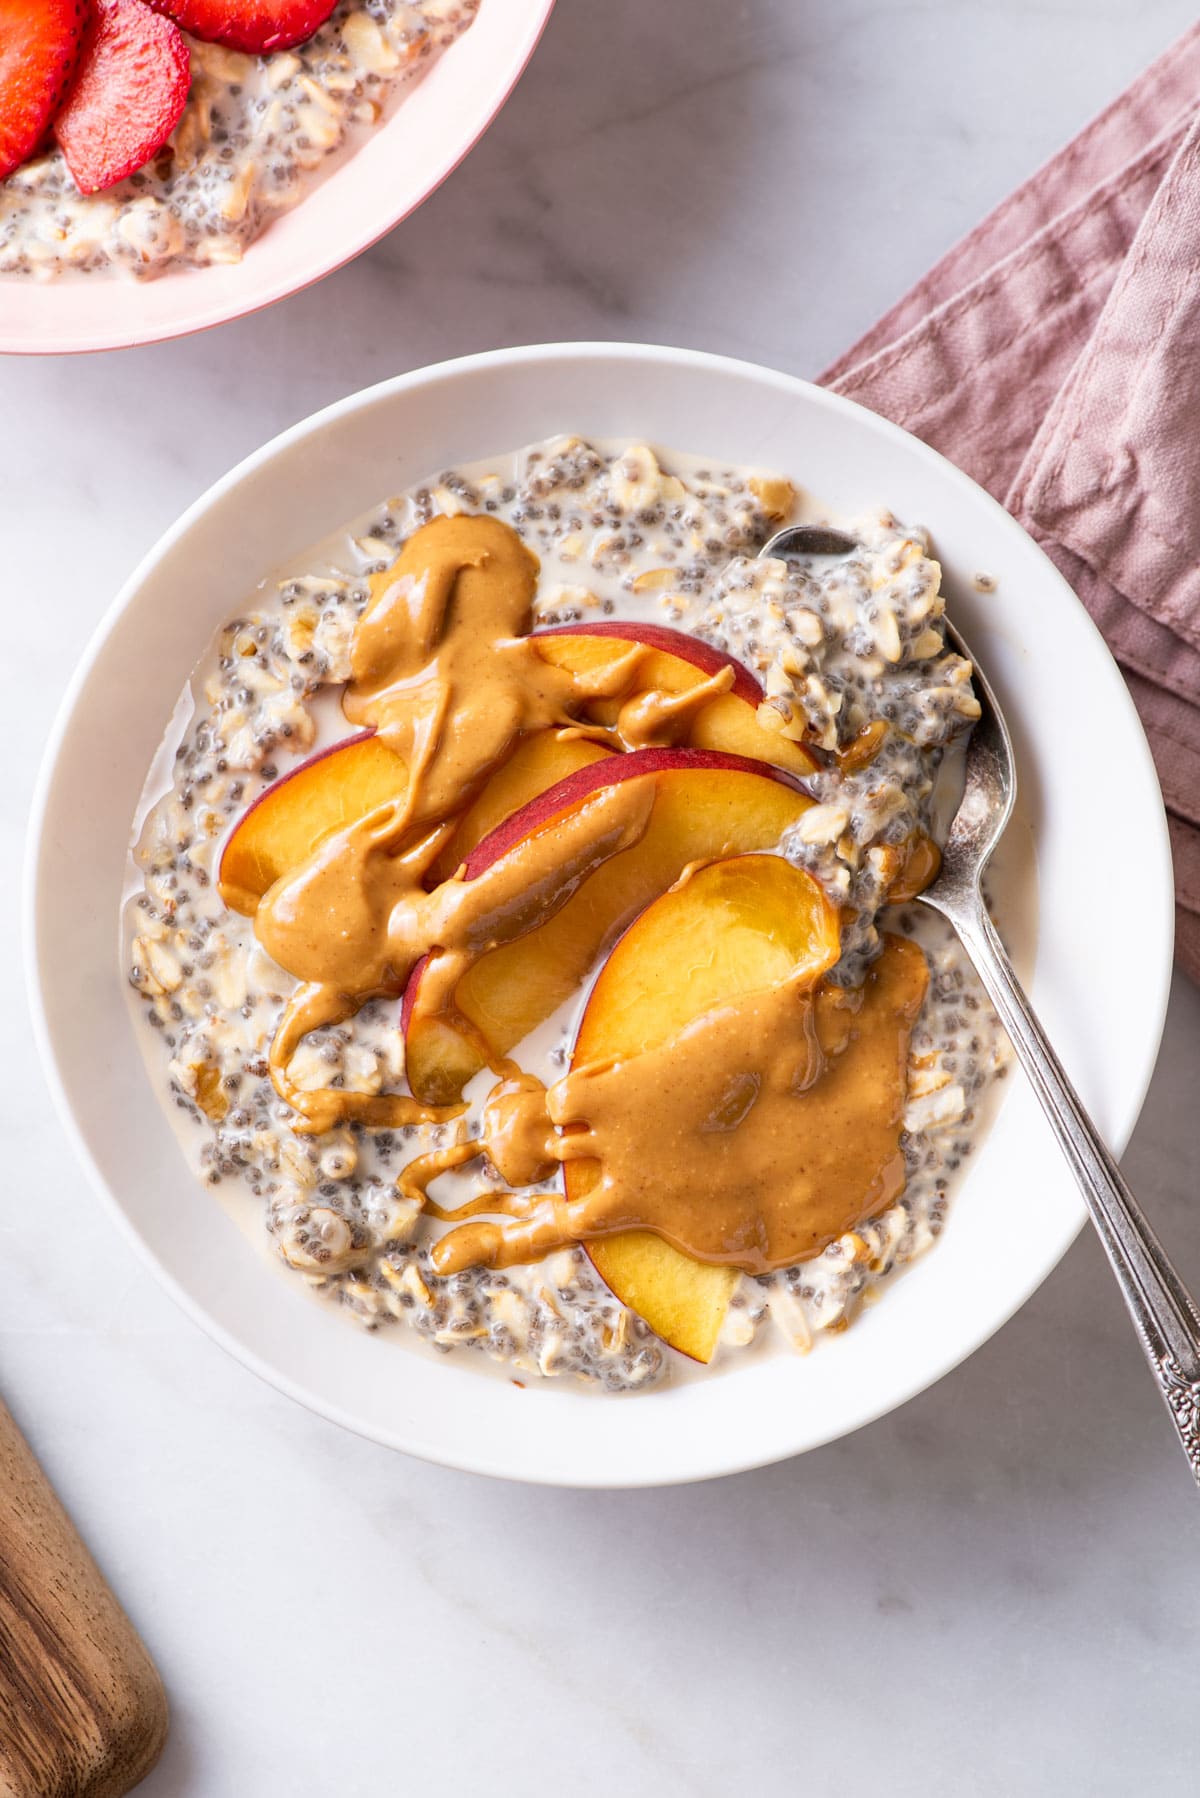 Overnight oats with chia seeds in a white bowl with peach slices and peanut butter.